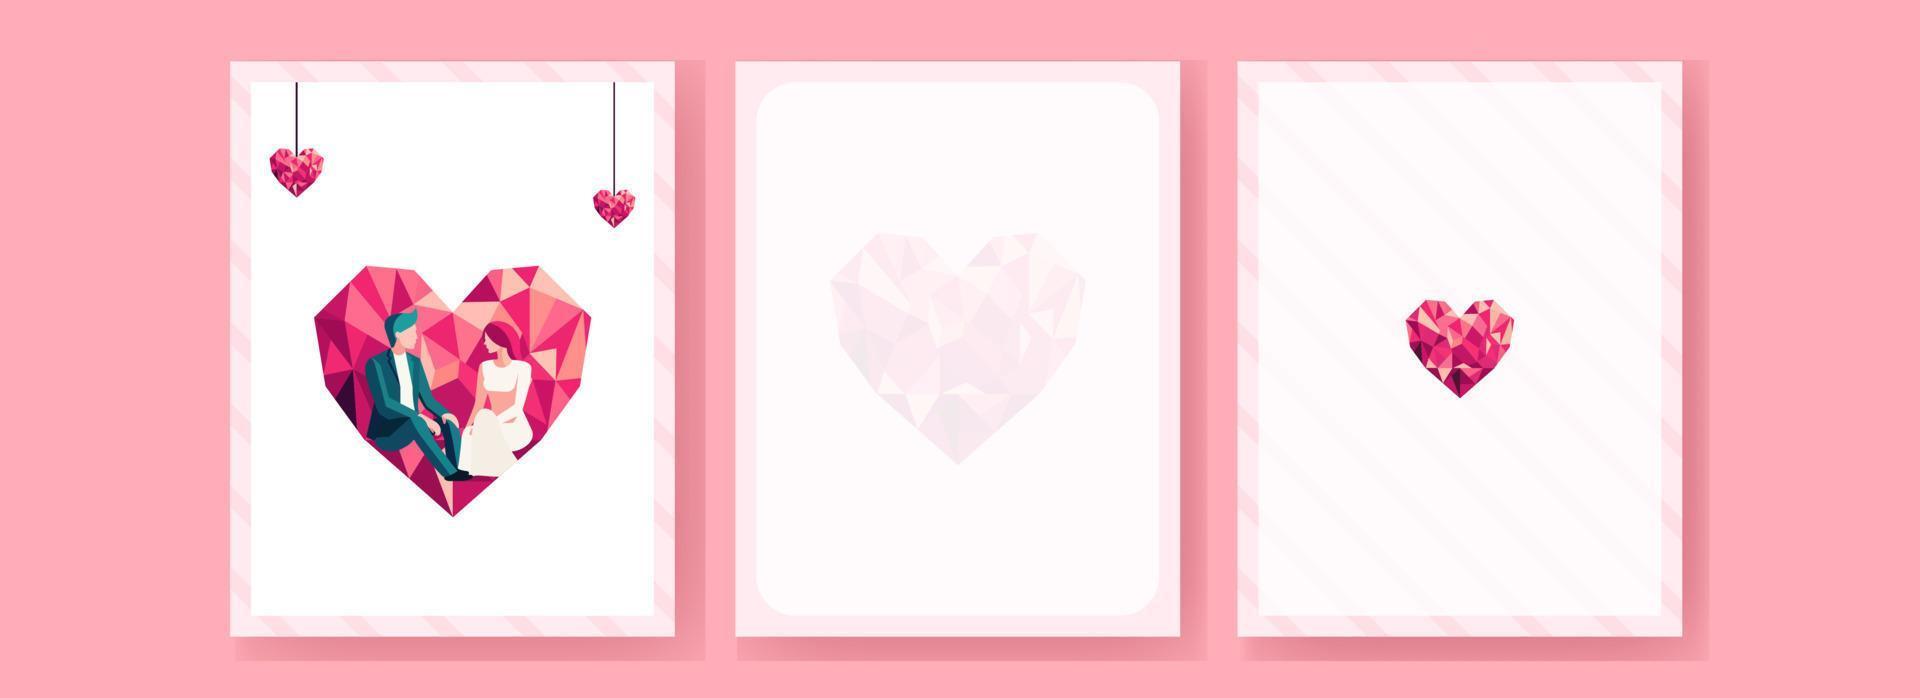 Valentines Day Greeting Card With Romantic Couple Character, Polygon Heart And Space For Message. vector